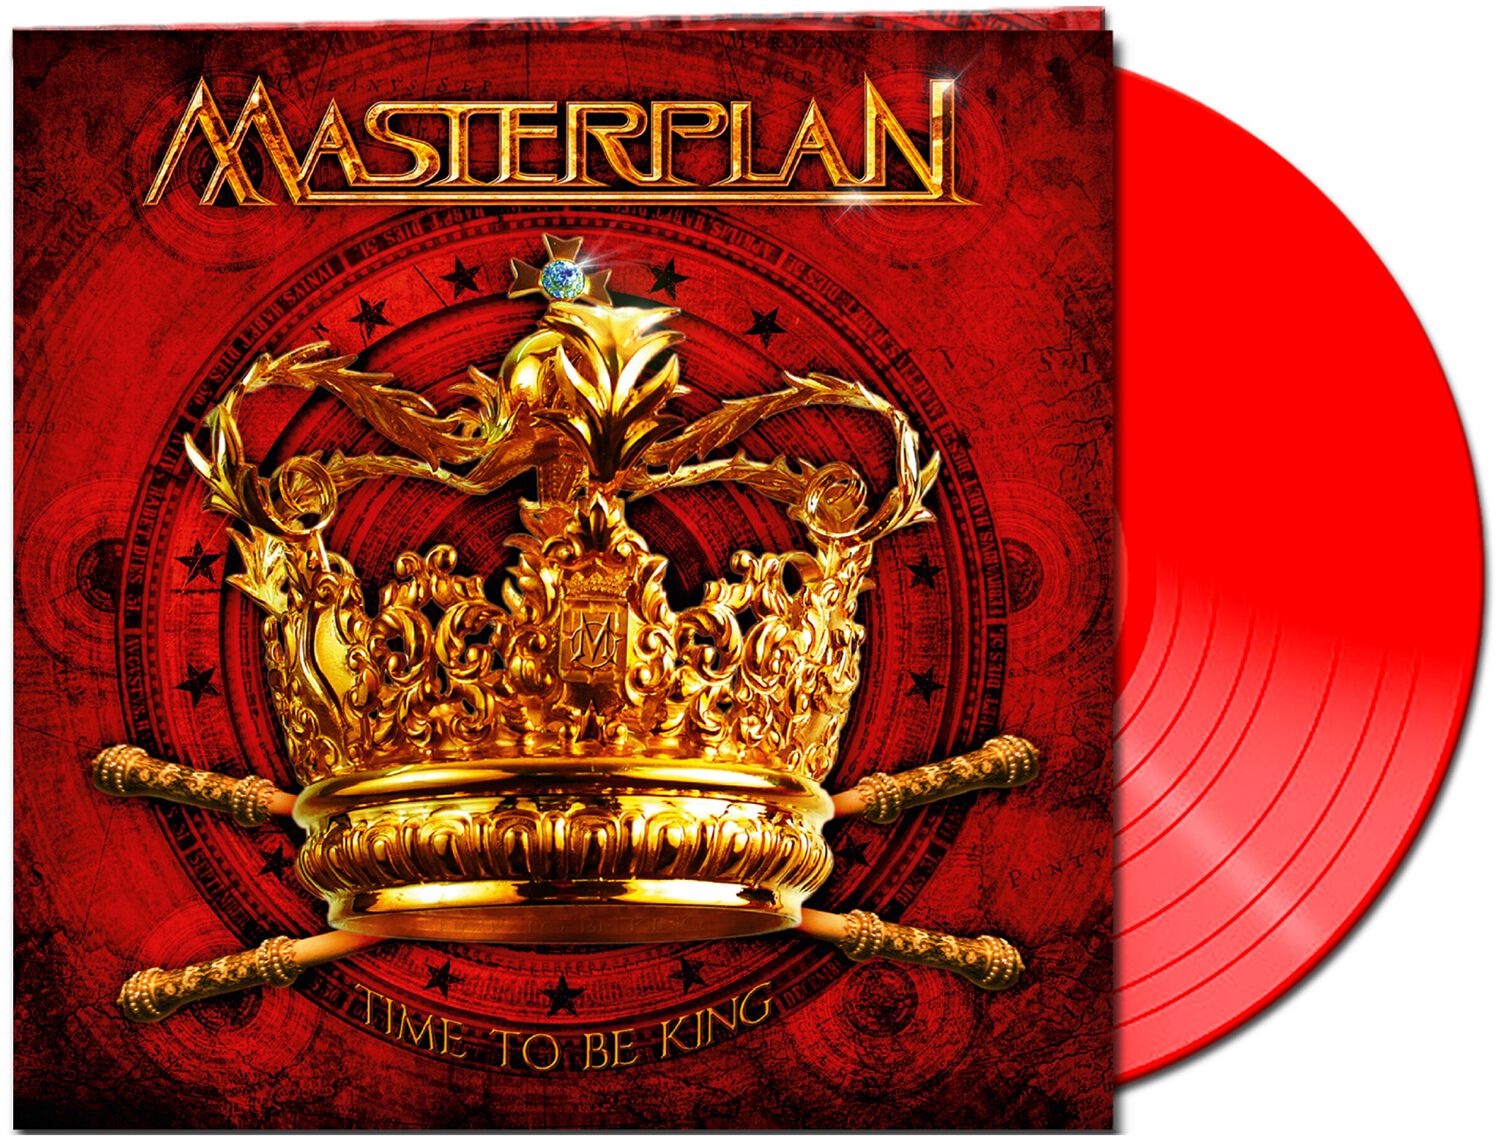 Masterplan Time to be king LP multicolor